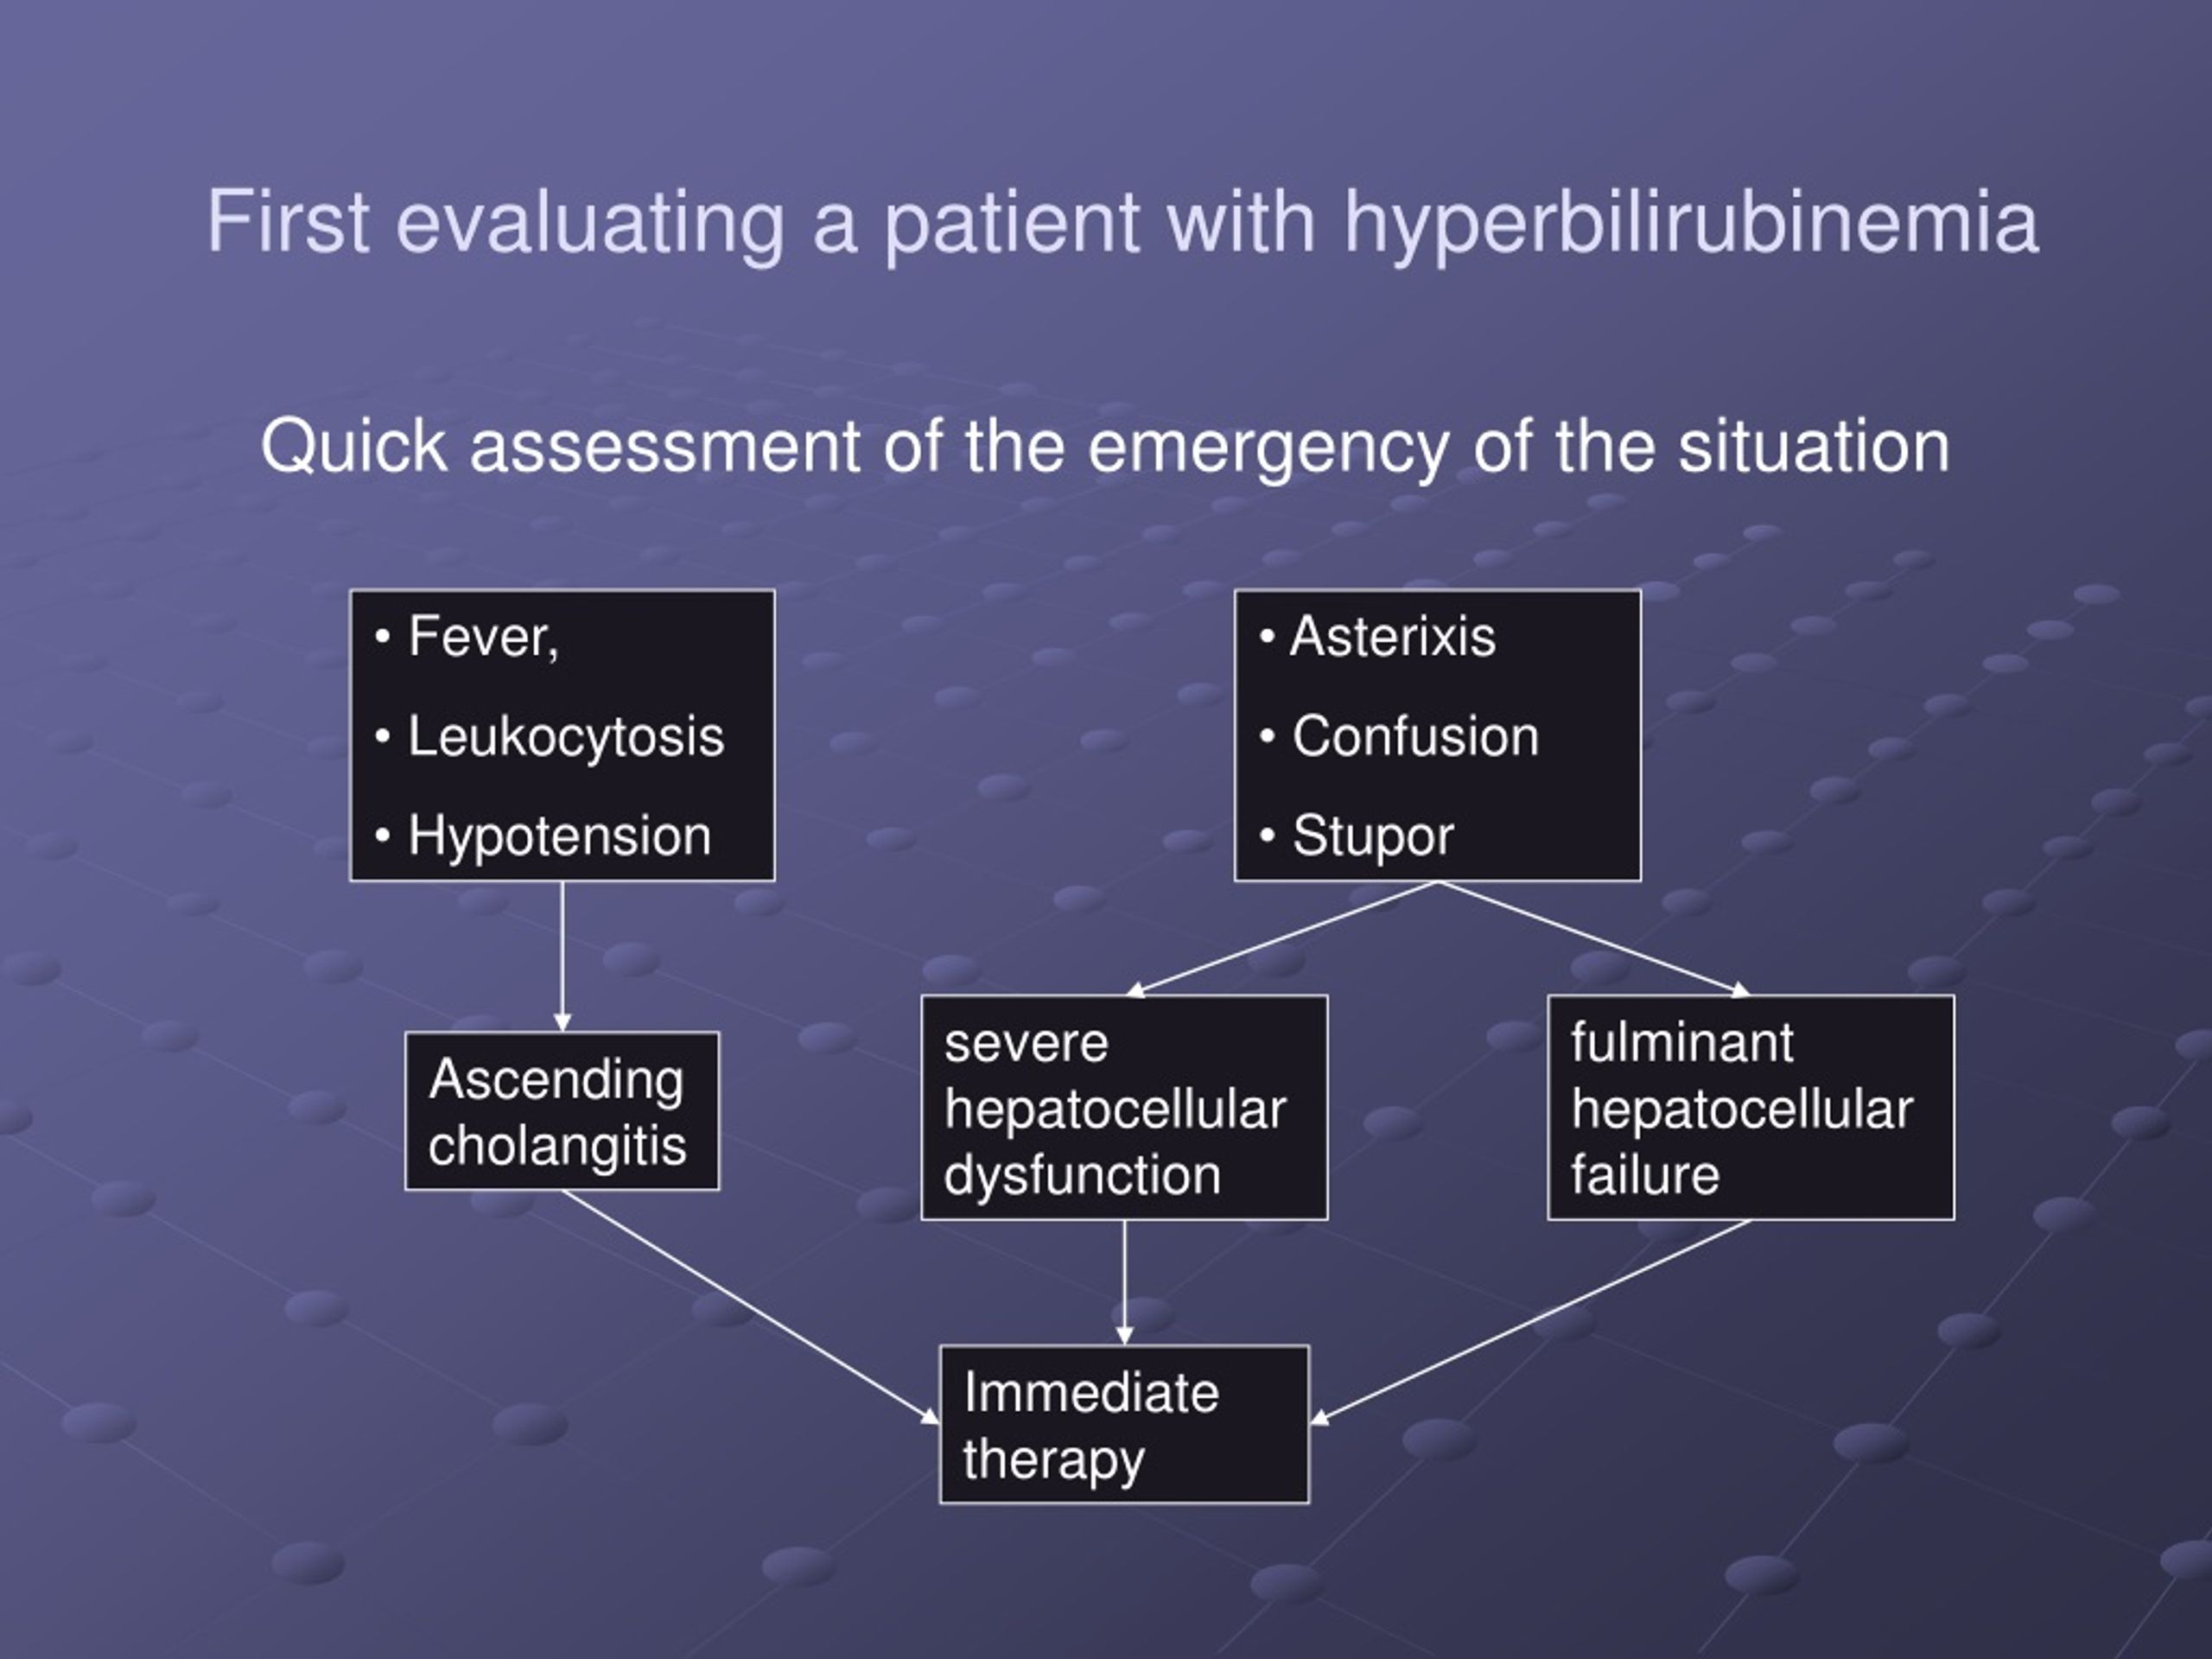 Ppt Evaluation Of A Patient With Jaundice Powerpoint Presentation